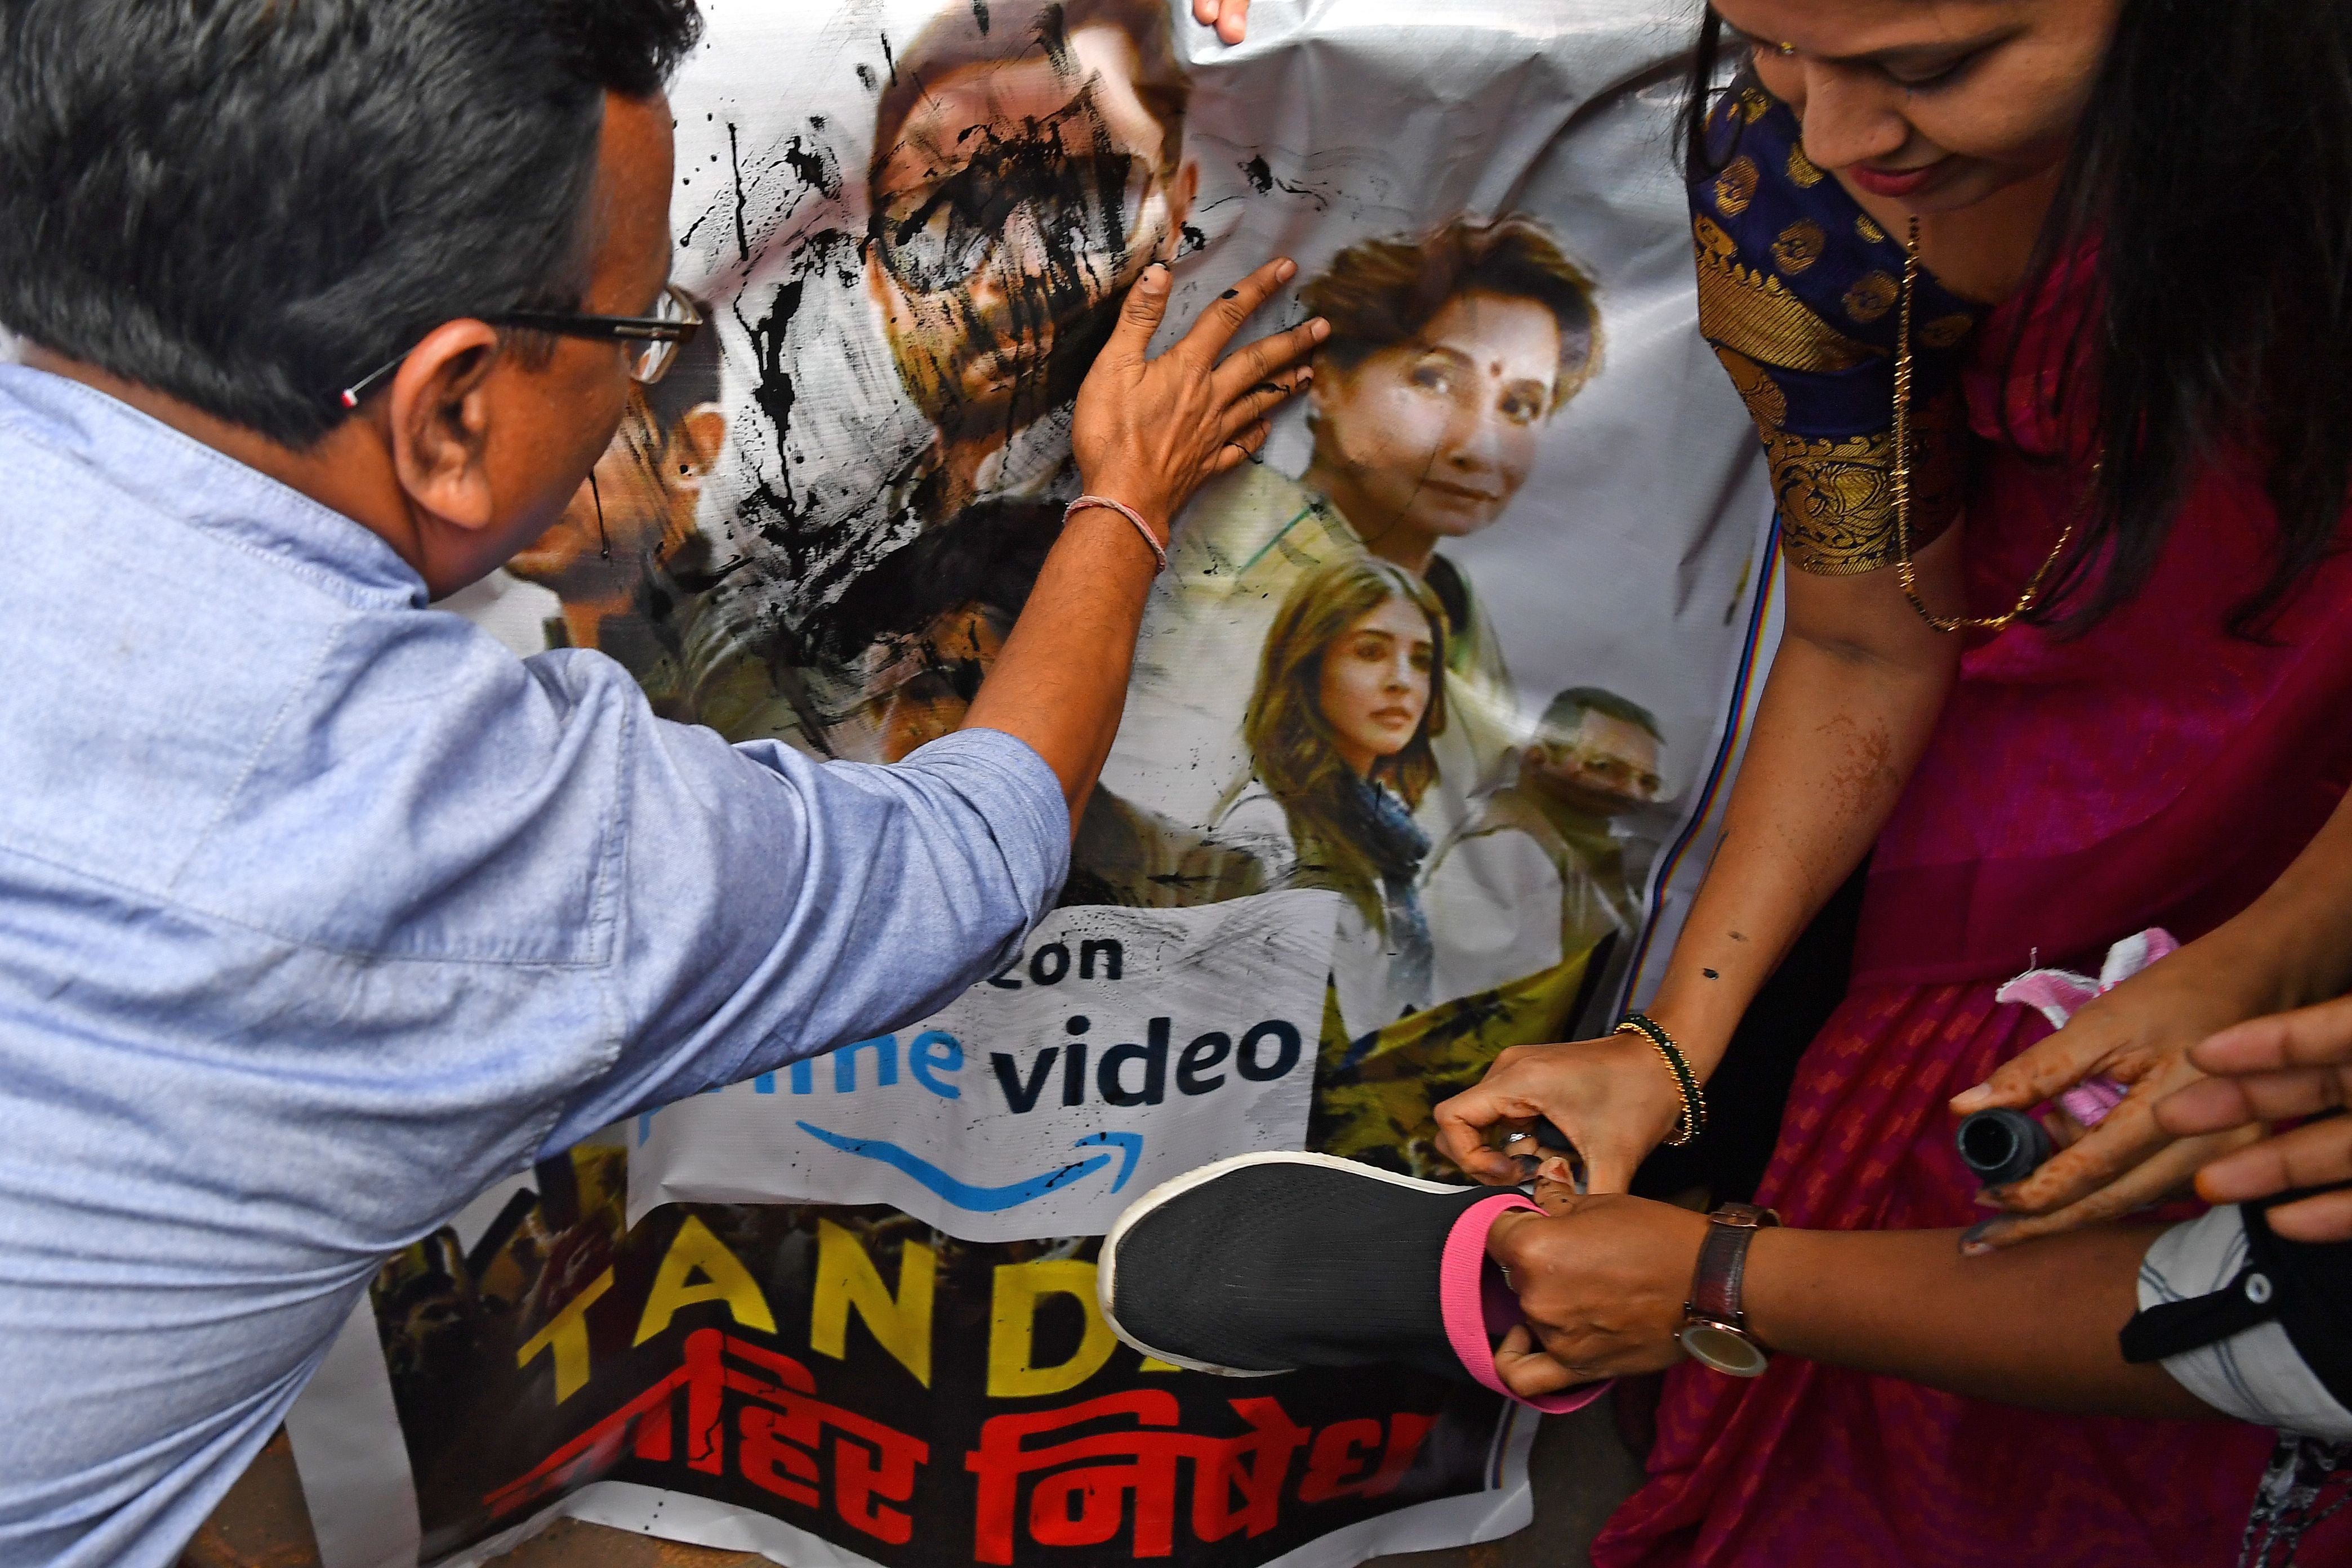 Supporters of India’s ruling Bharatiya Janata Party (BJP) pour ink and beat a poster with footwear at a protest against the new web series ‘Tandav’ in Mumbai